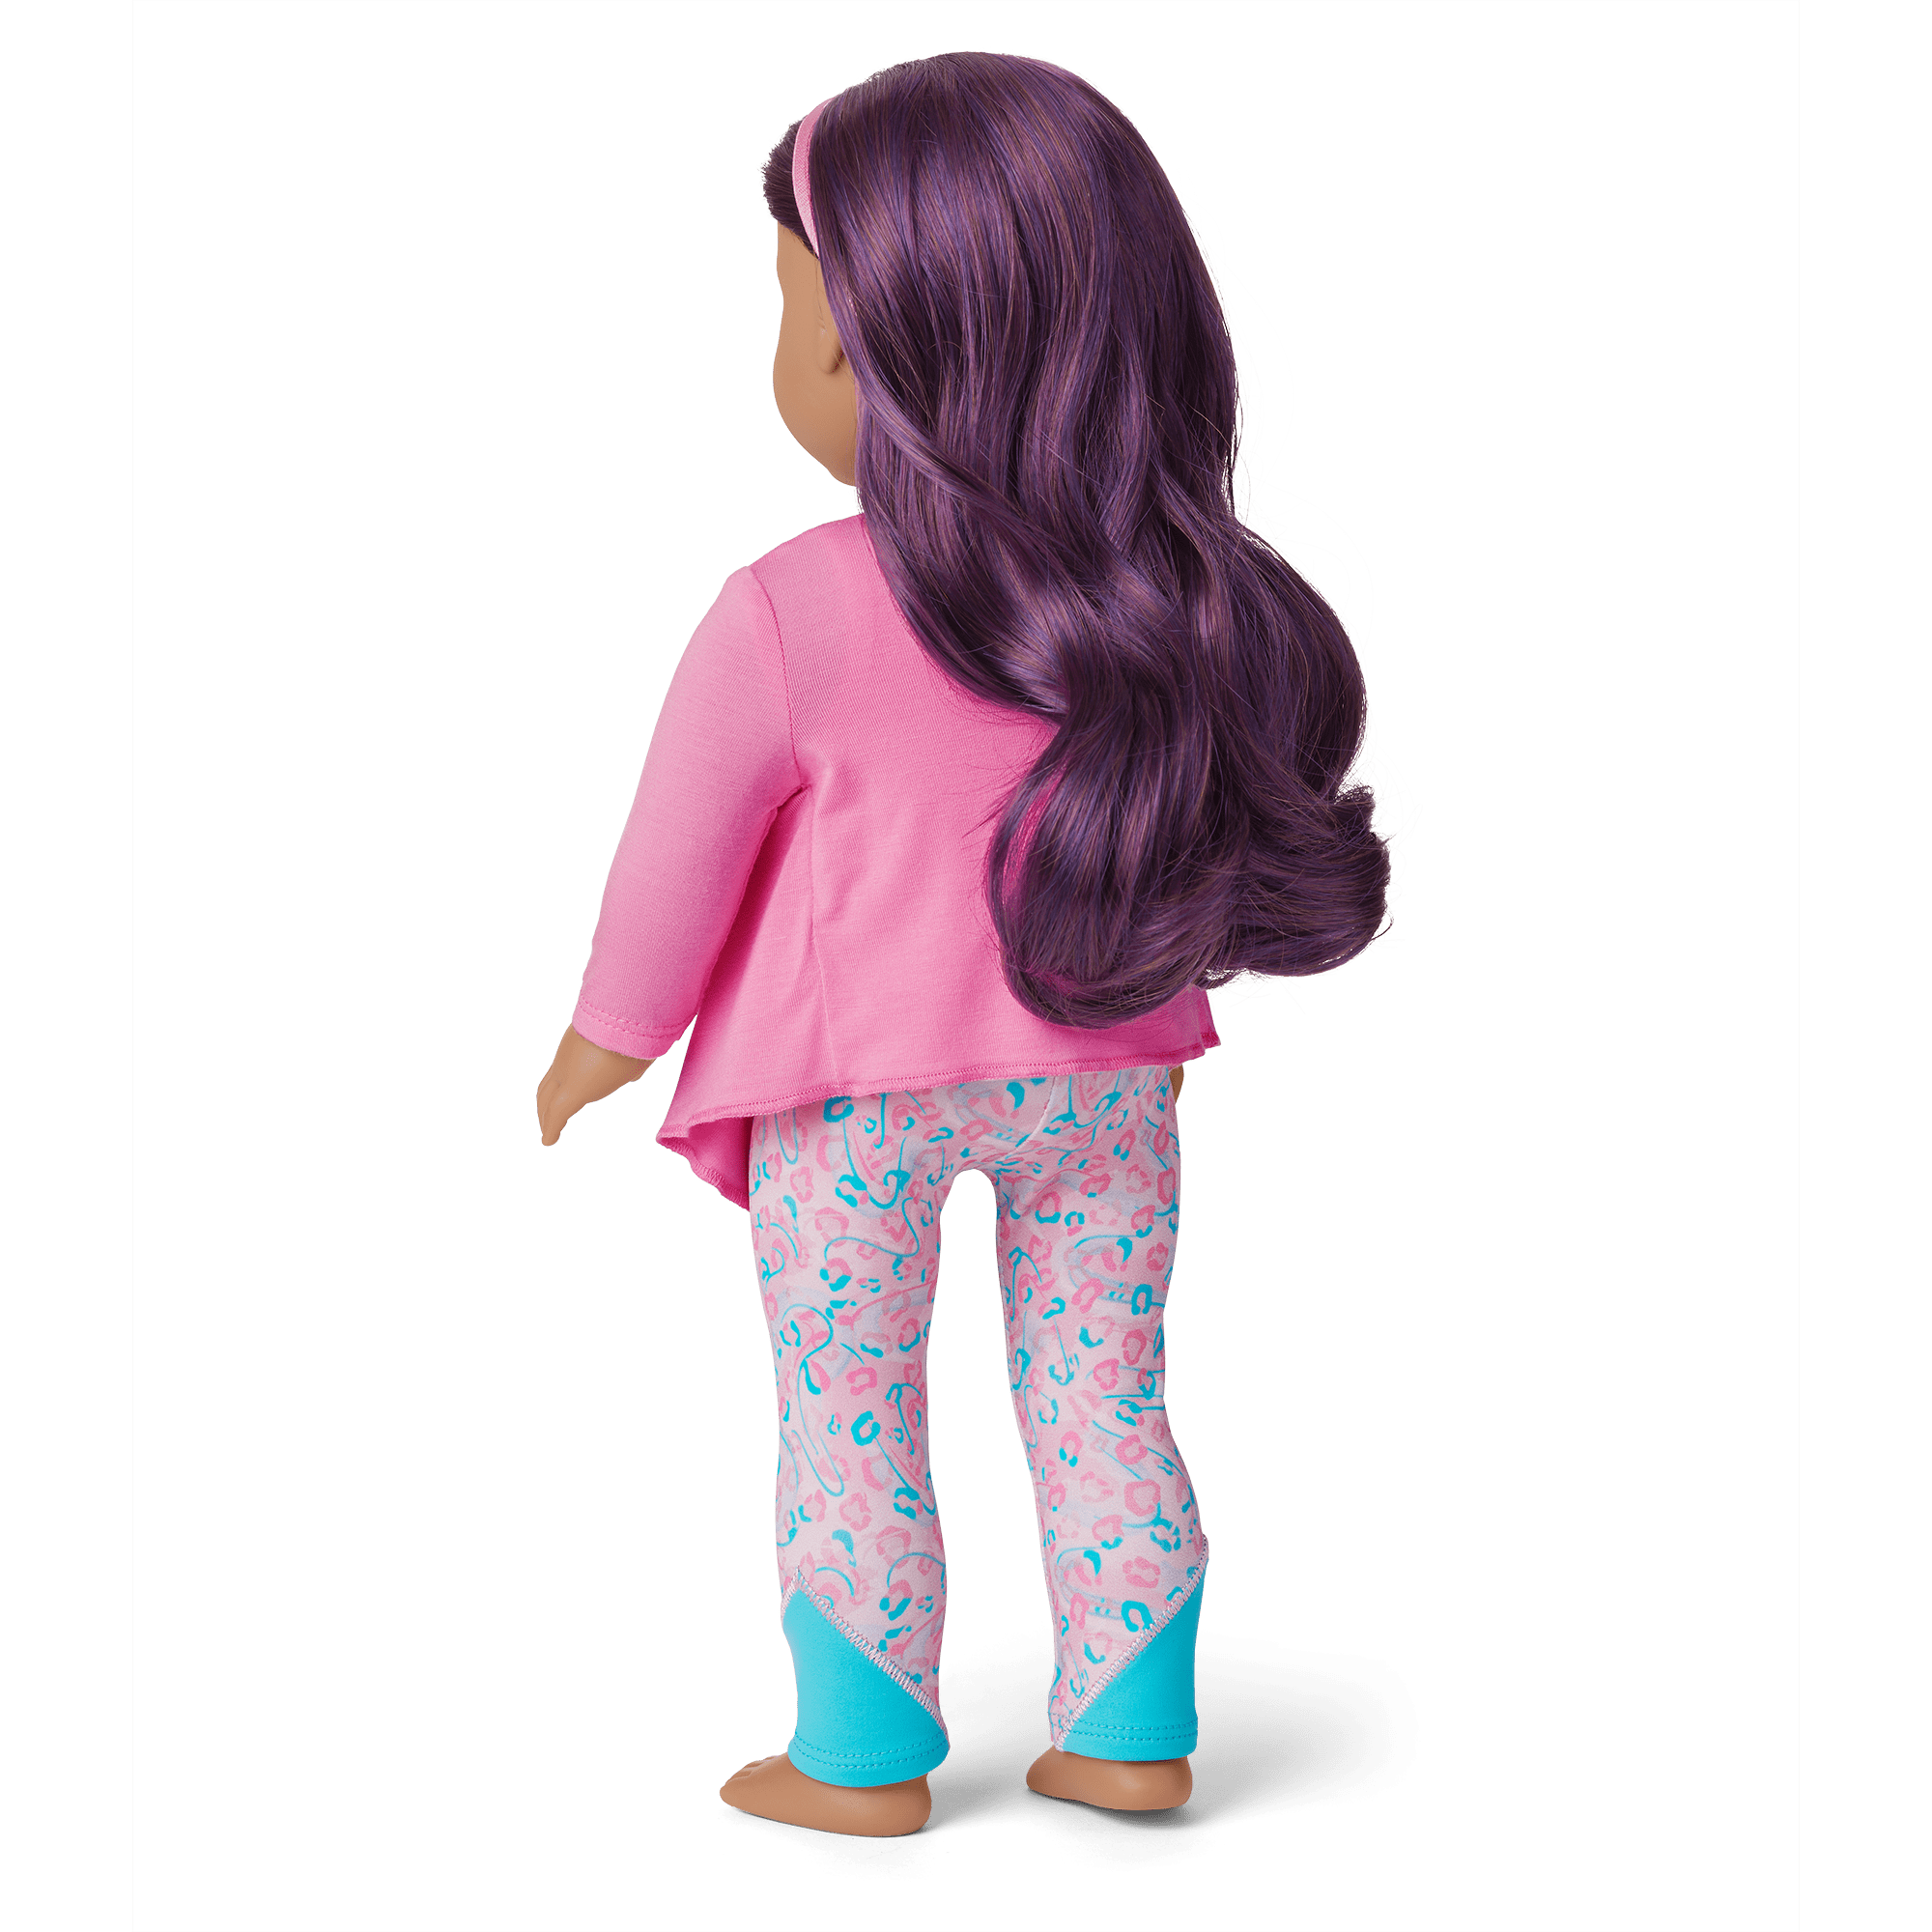 18 Doll Clothes-18 Doll YOGA OUTFIT Fits American Girl Dolls 6 Pc Deluxe  Set yoga Mat Sandals-top-yoga Jacket-yoga Pants-scrunchie -  Canada